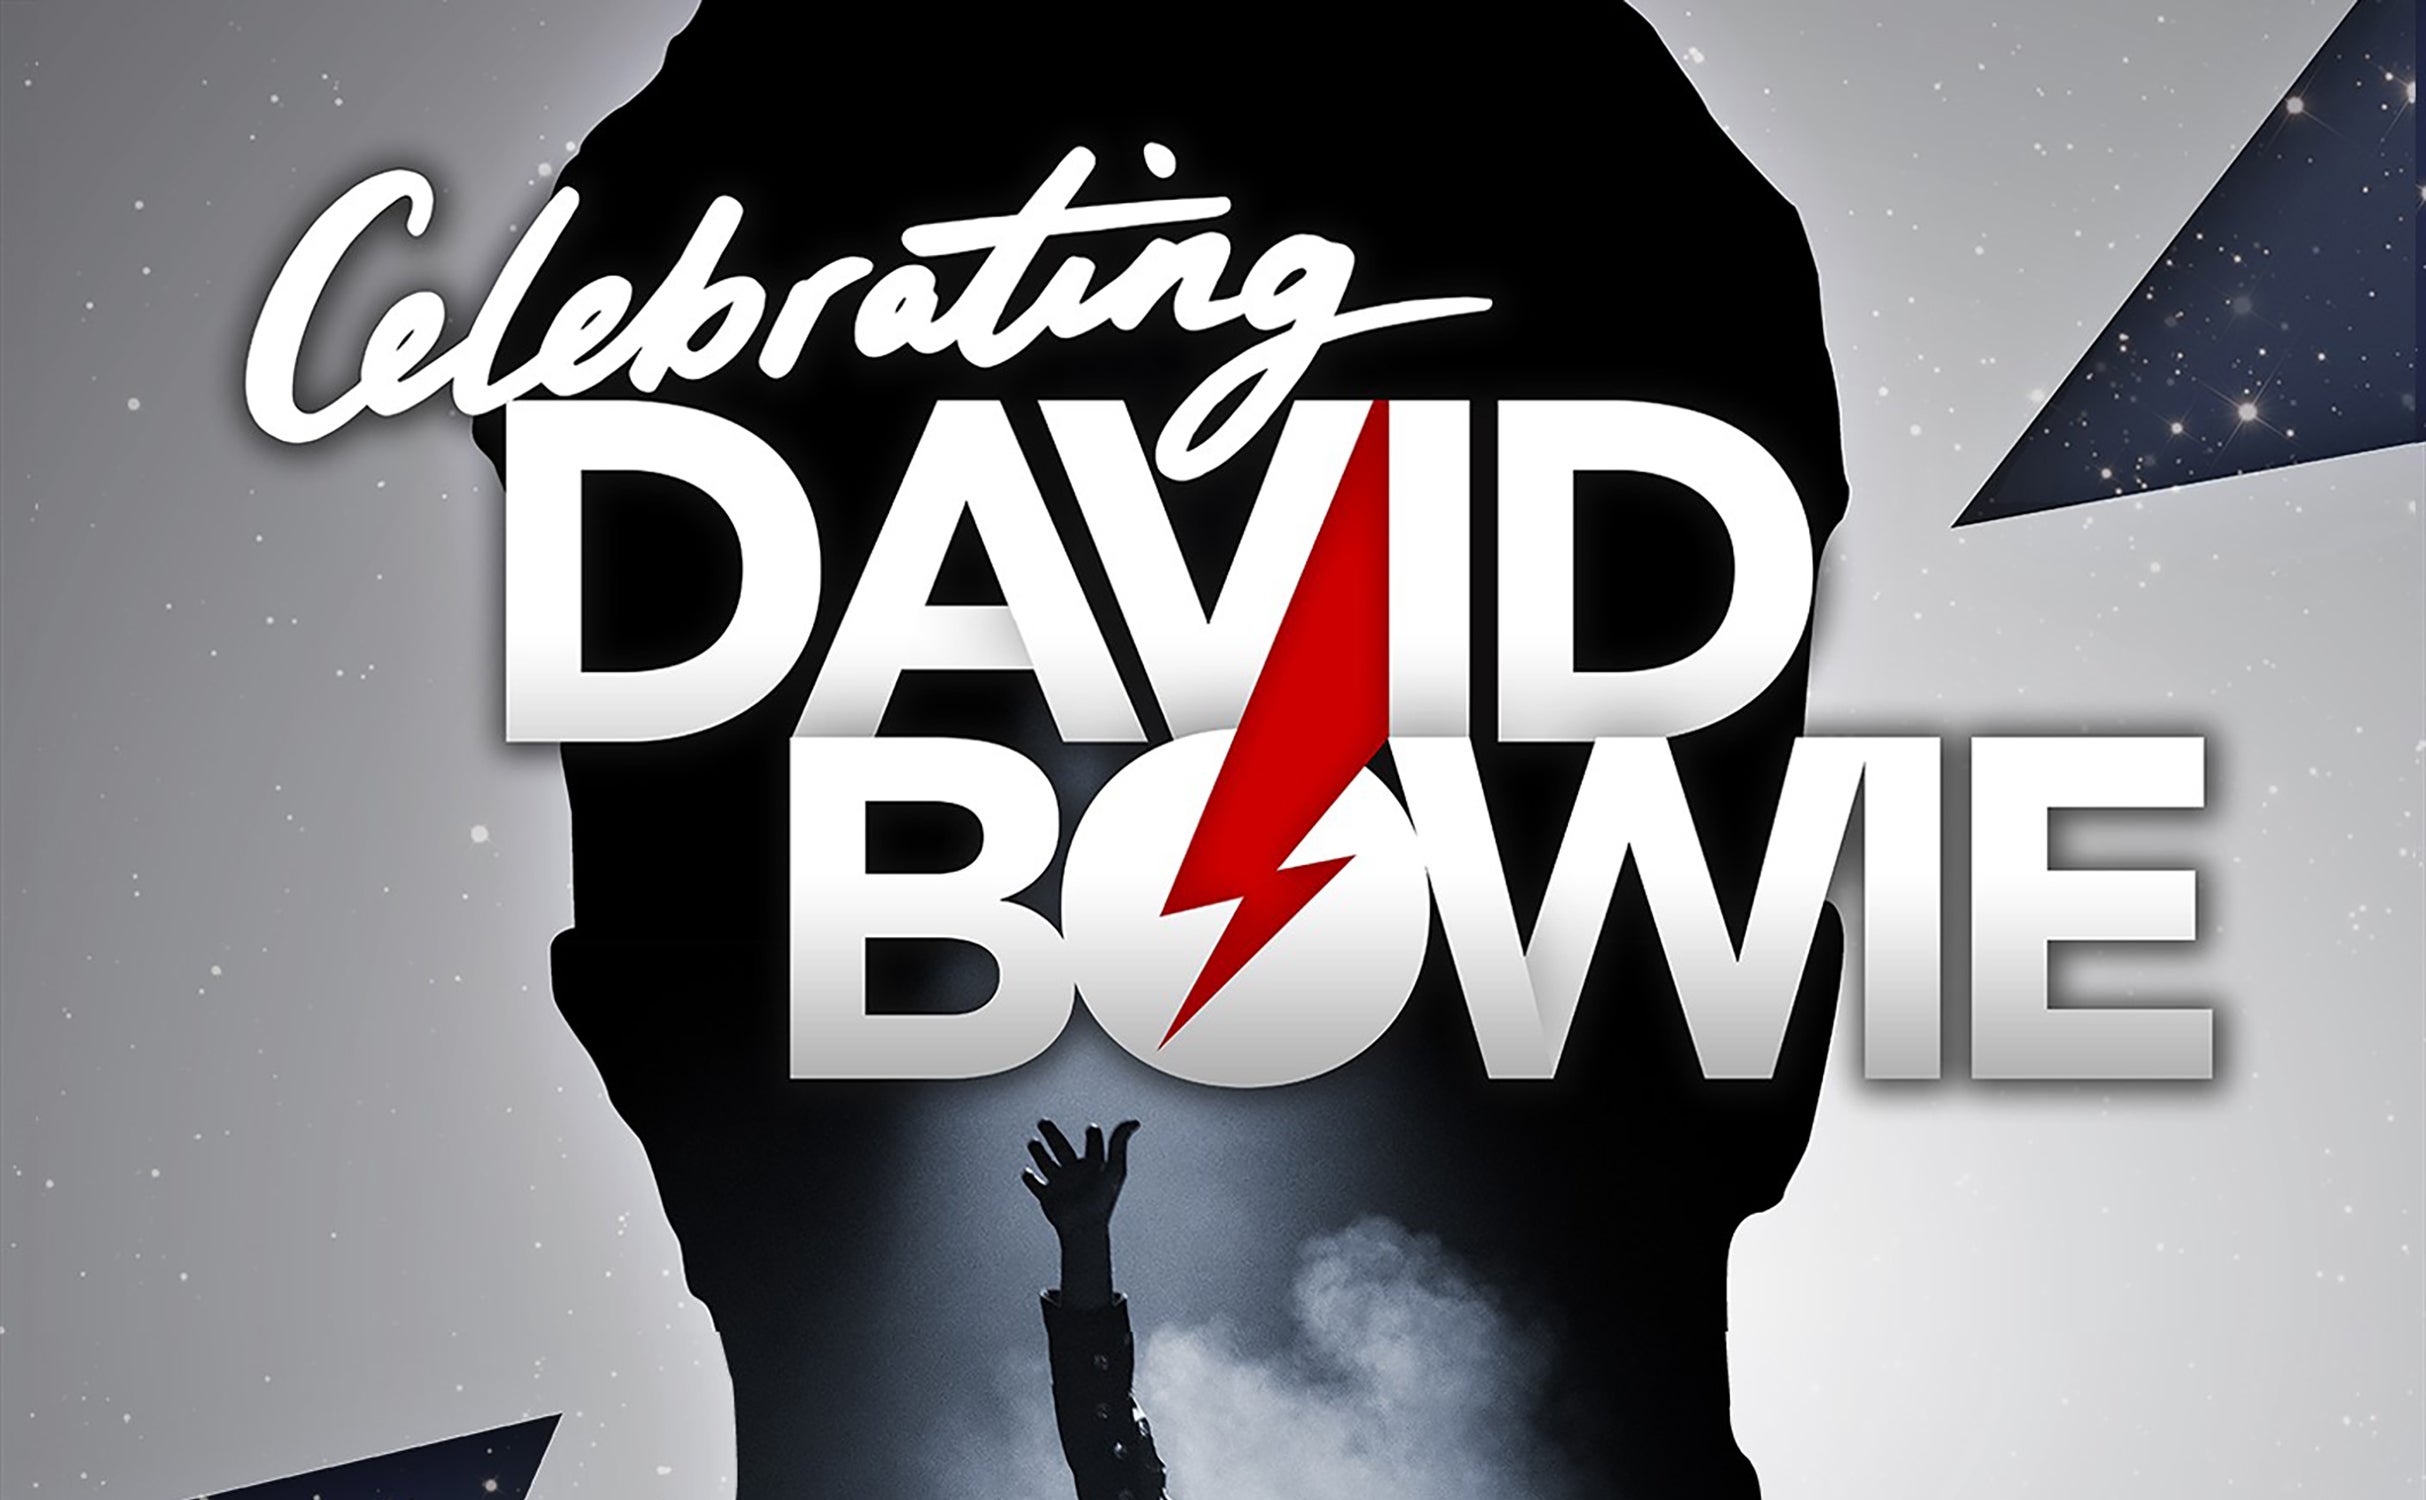 Celebrating David Bowie - Live in Concert  in Anaheim promo photo for Official Platinum presale offer code